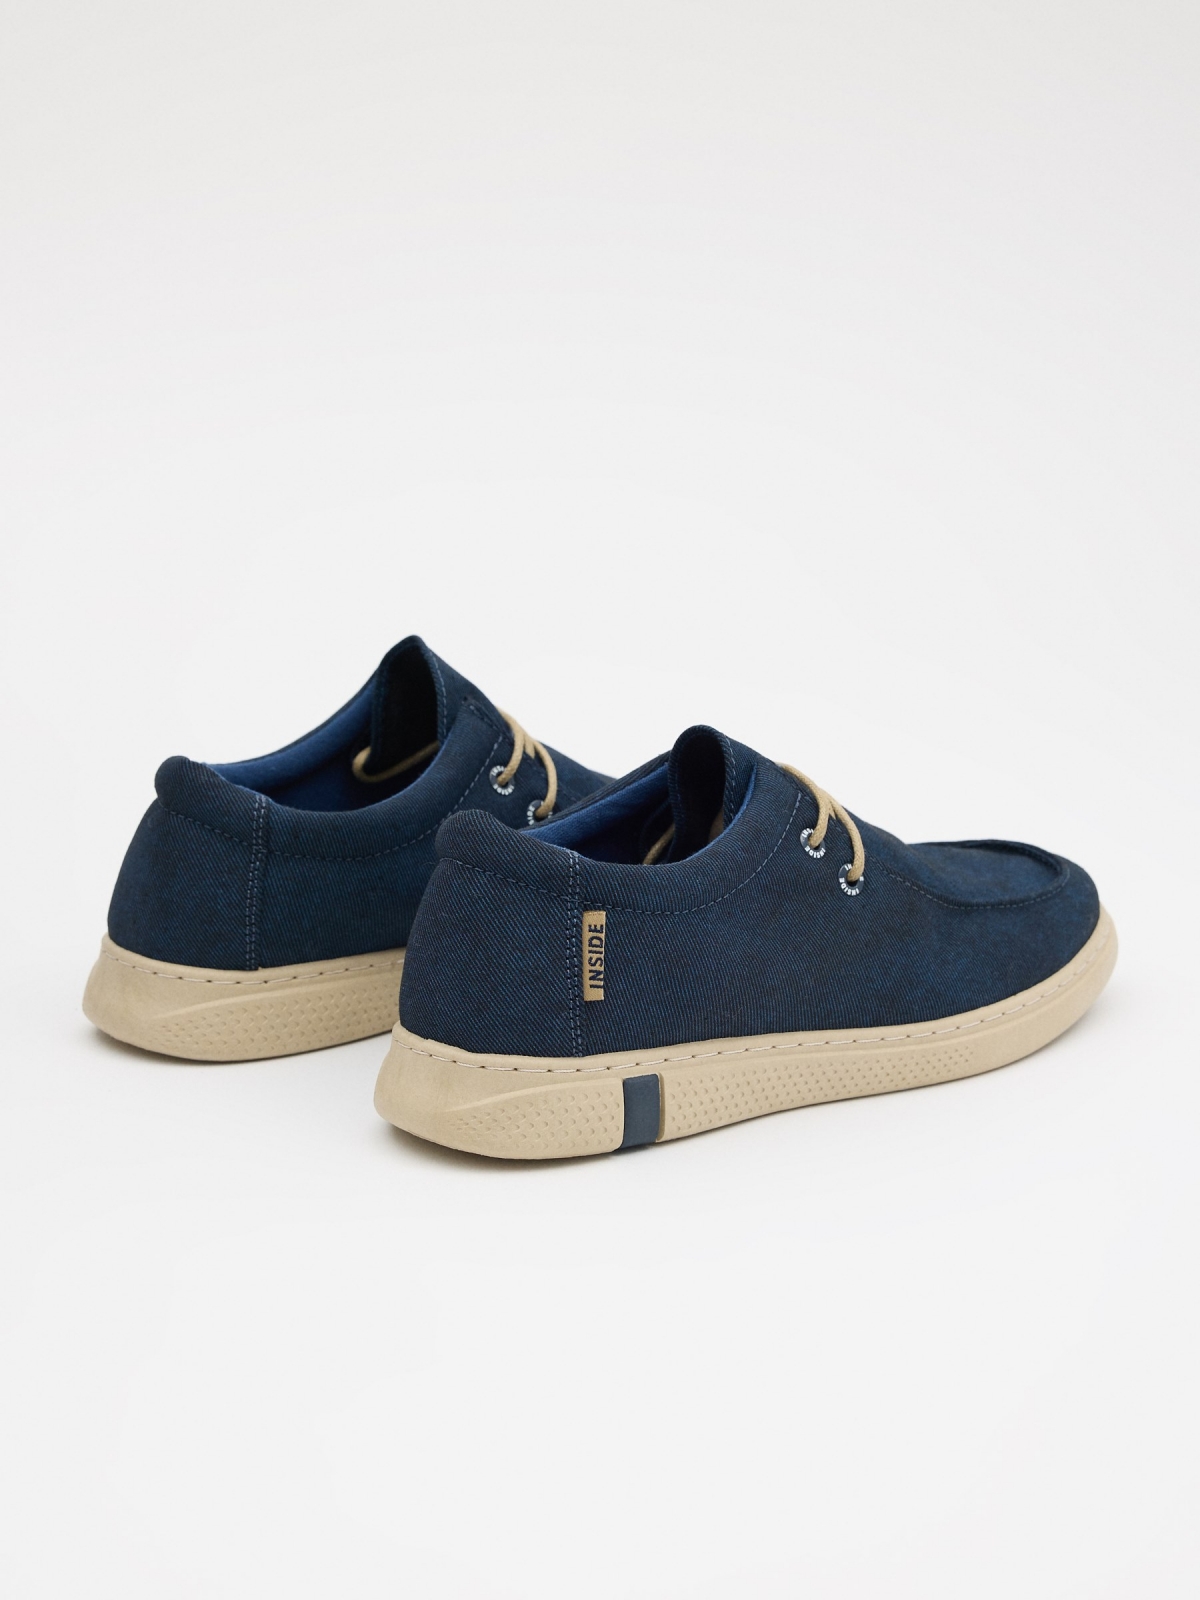 Casual navy canvas shoes petrol blue 45º back view